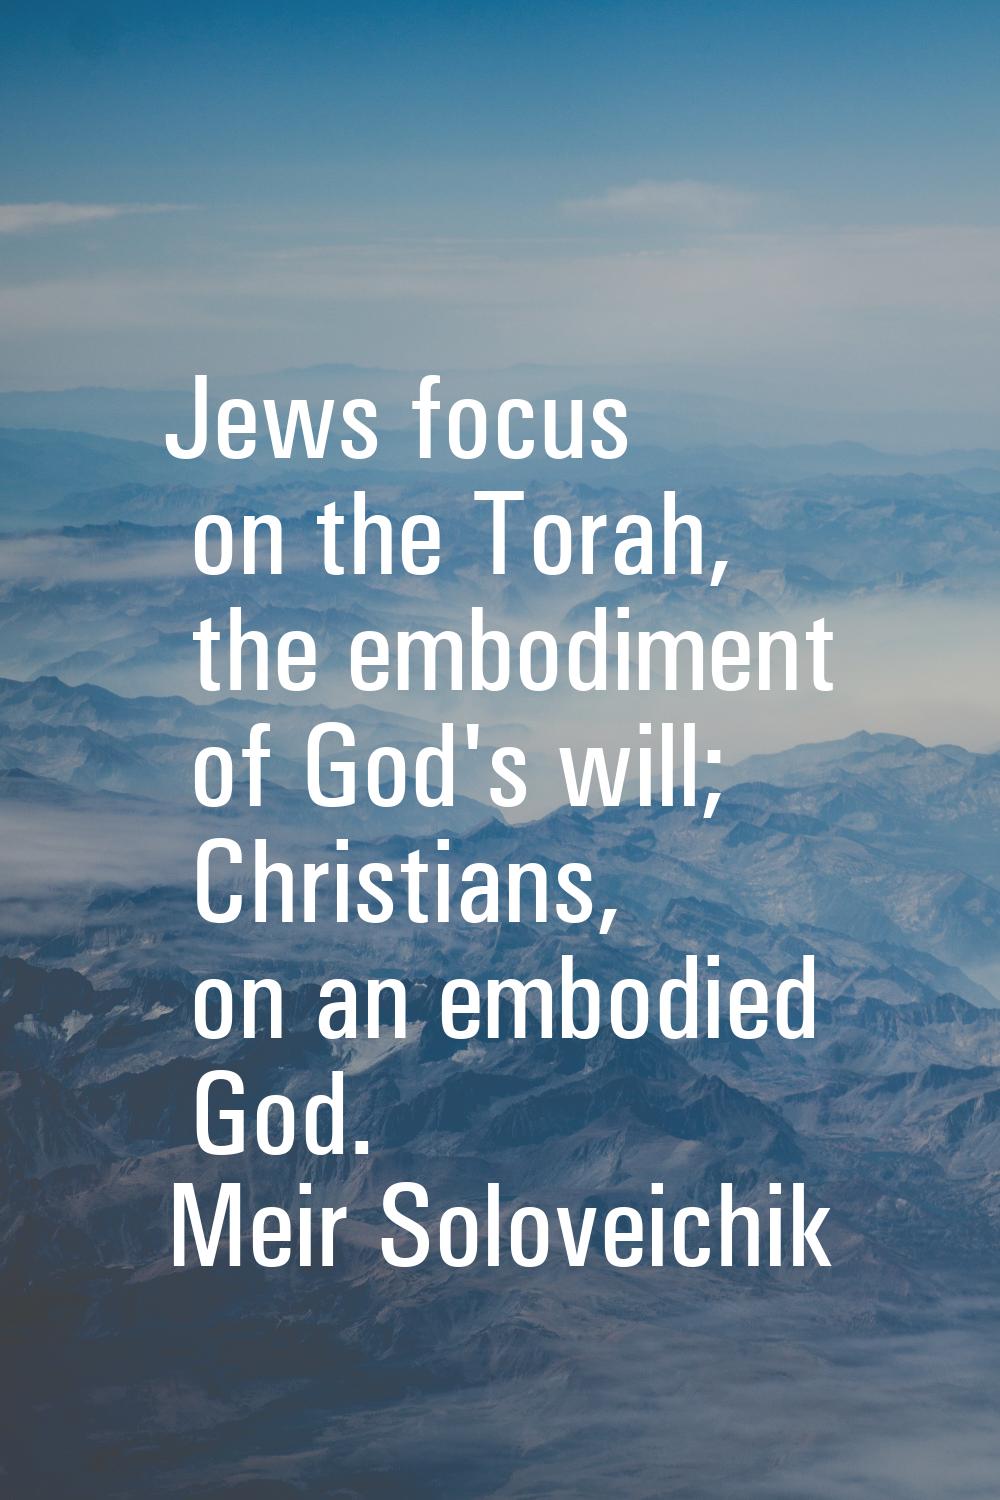 Jews focus on the Torah, the embodiment of God's will; Christians, on an embodied God.